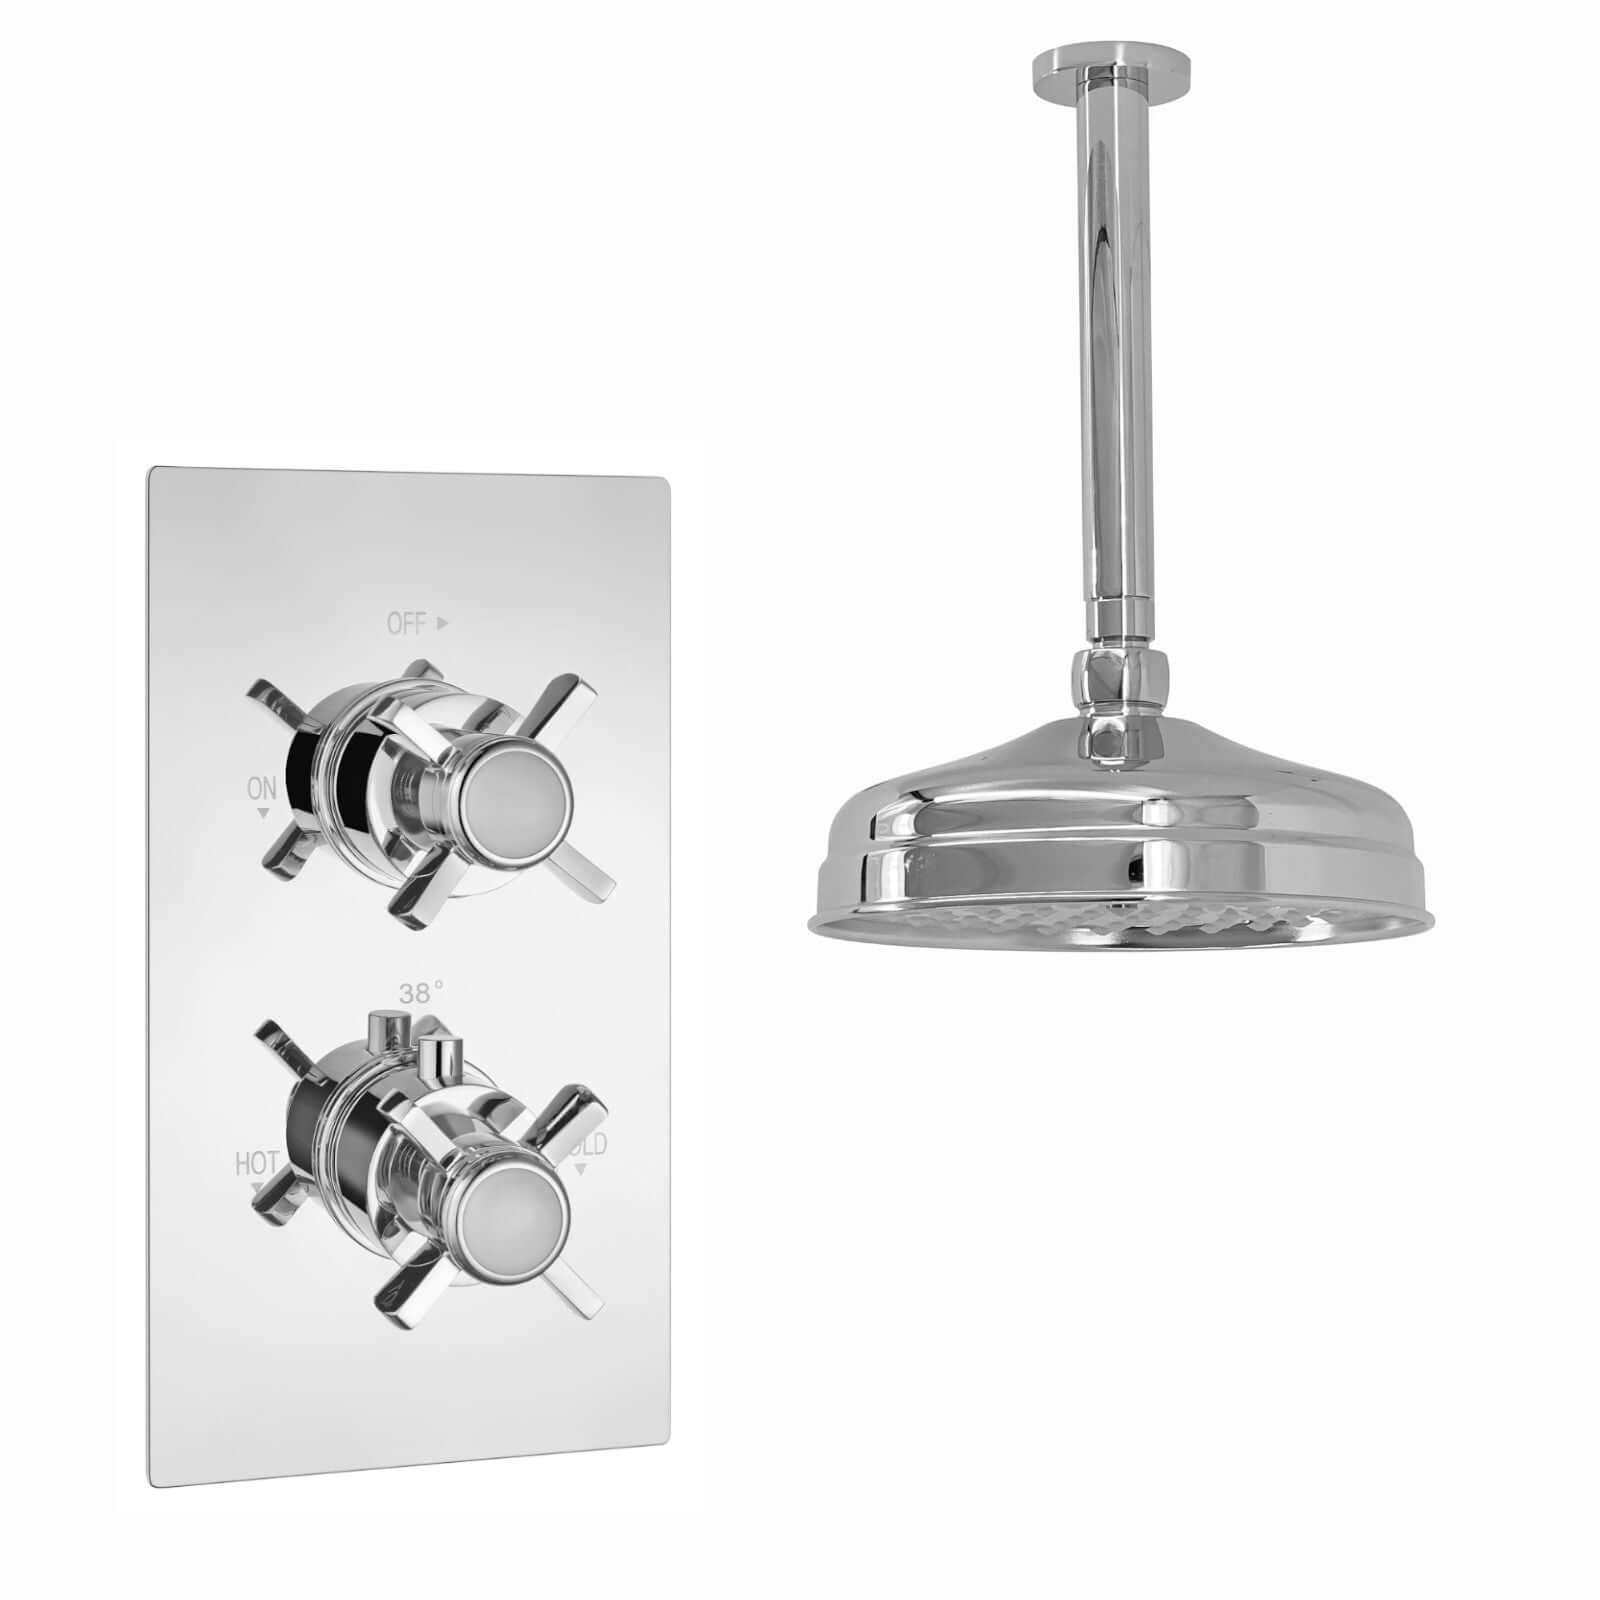 SH0257-01-edward-traditional-crosshead-and-white-details-concealed-thermostatic-shower-set-ceiling-fixed-8-shower-head-chrome-1-outlet